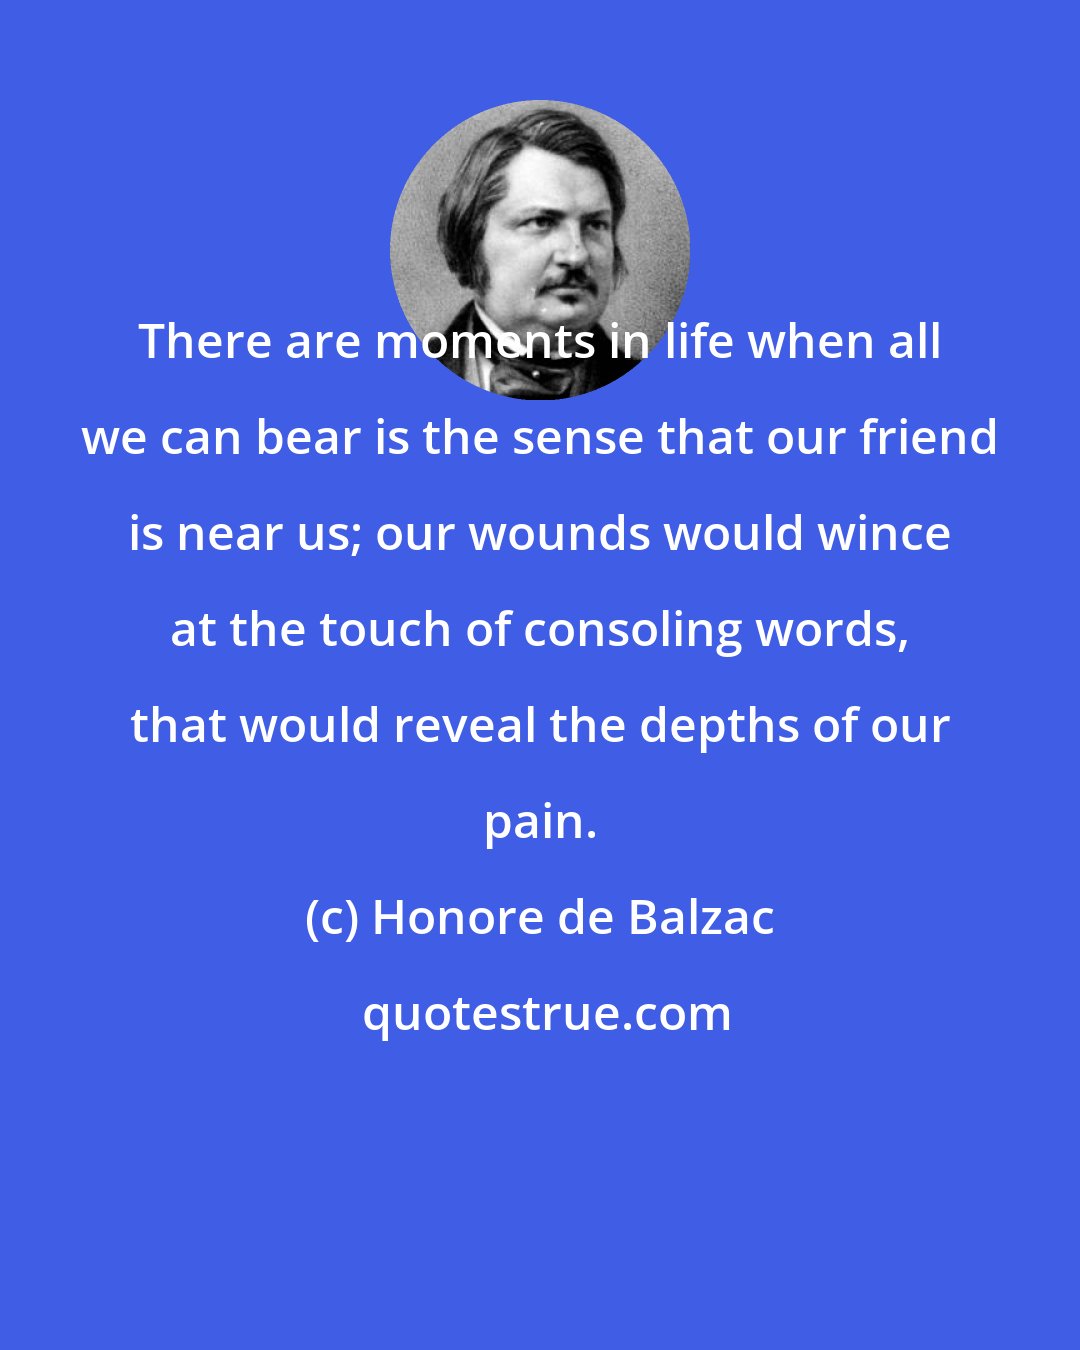 Honore de Balzac: There are moments in life when all we can bear is the sense that our friend is near us; our wounds would wince at the touch of consoling words, that would reveal the depths of our pain.